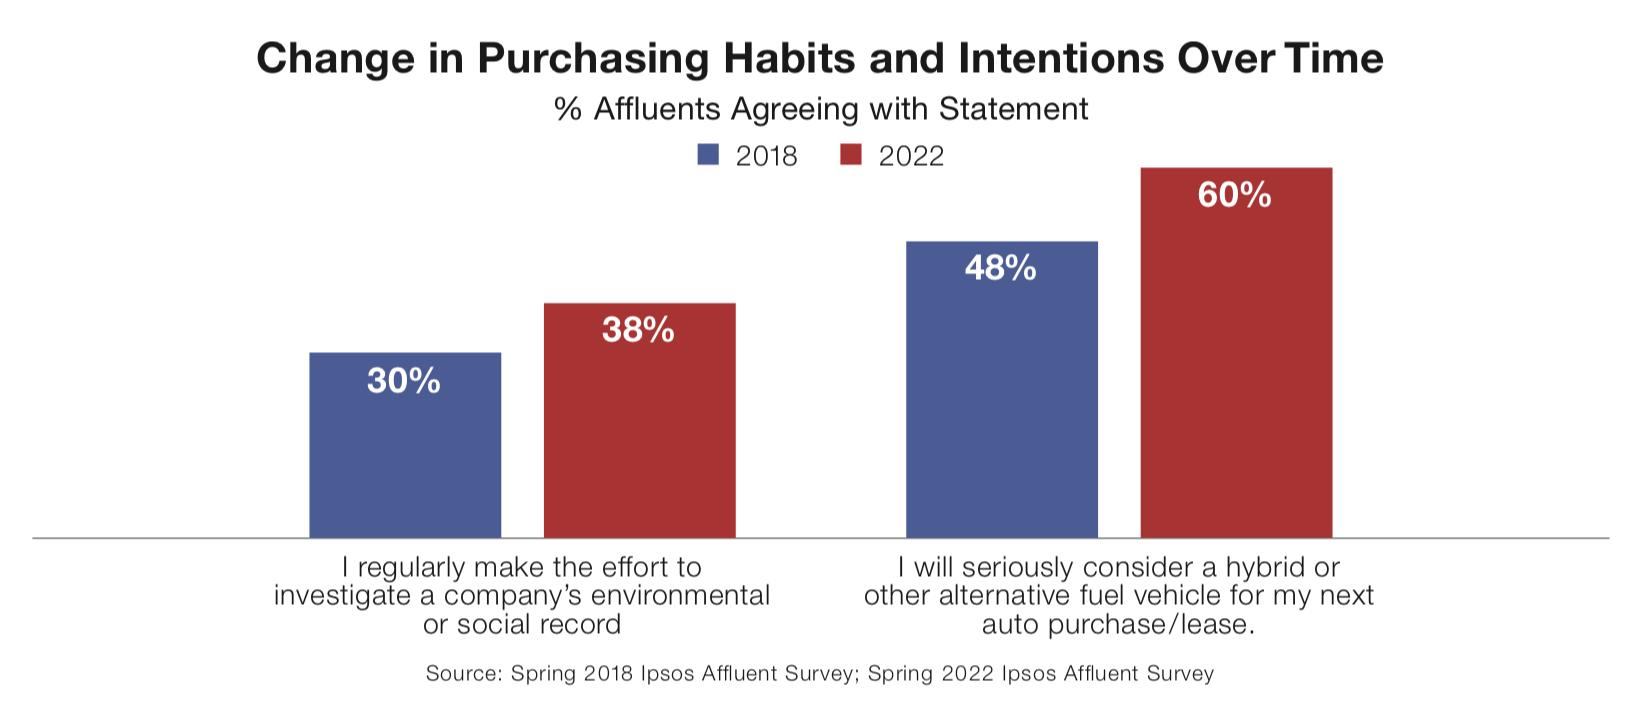 Change in purchasing habits and intentions over time